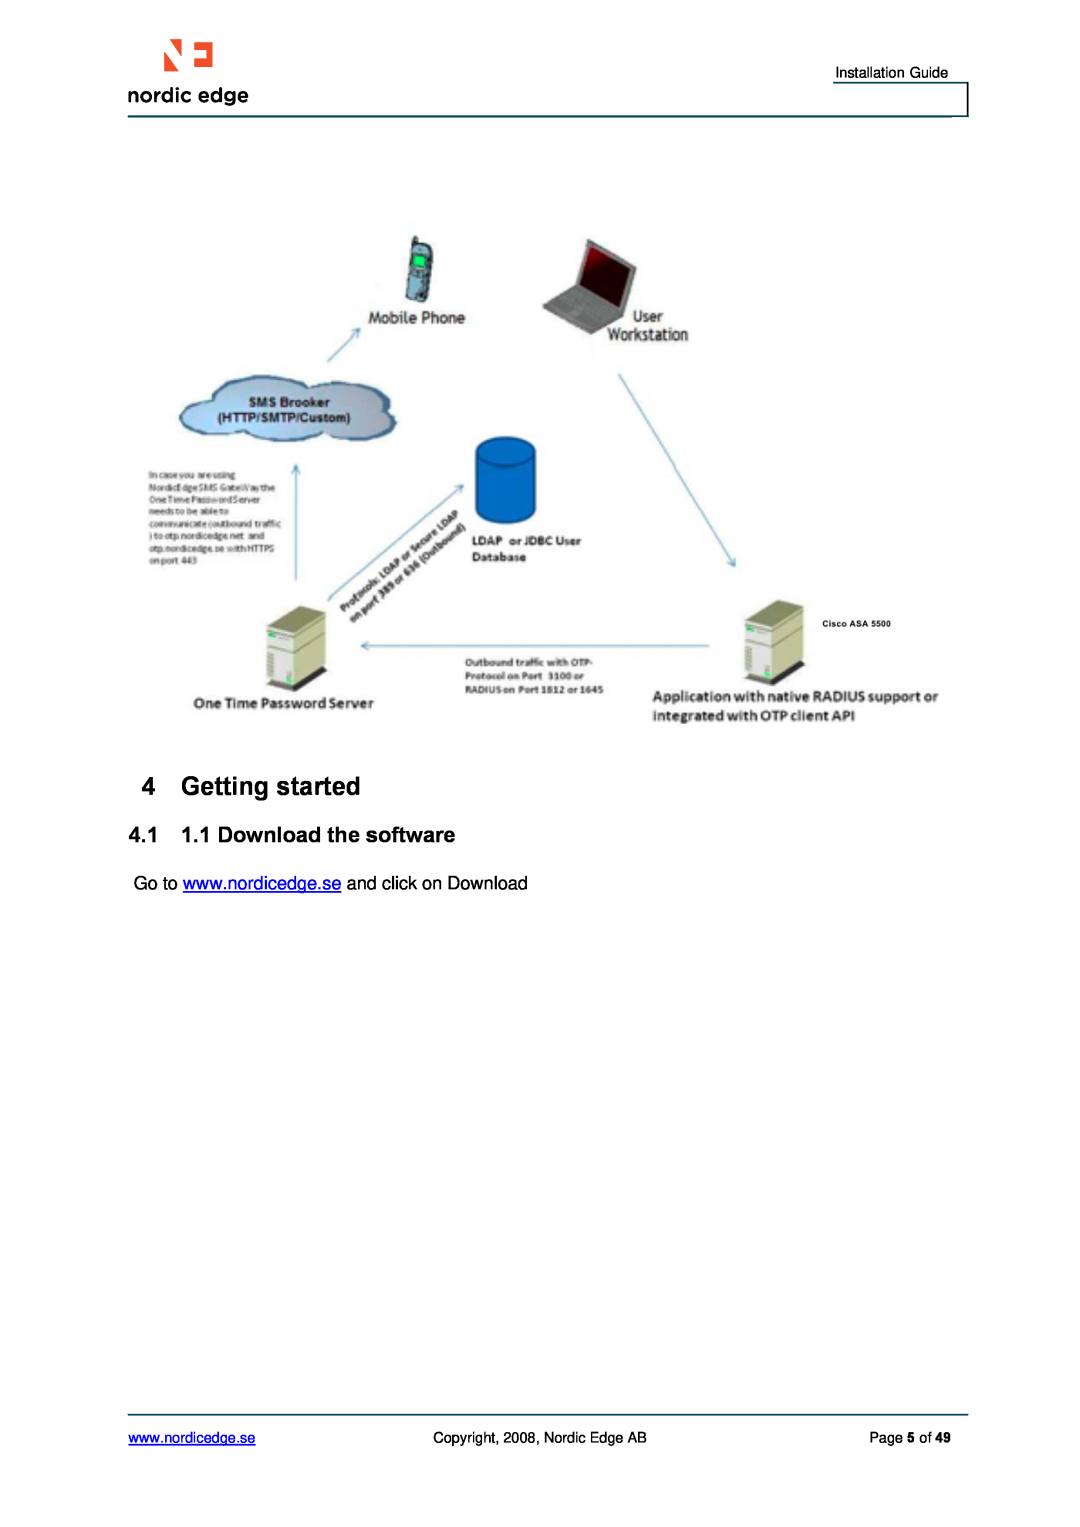 Cisco Systems ASA 5500 manual Getting started, Installation Guide, Copyright, 2008, Nordic Edge AB, Page 5 of 